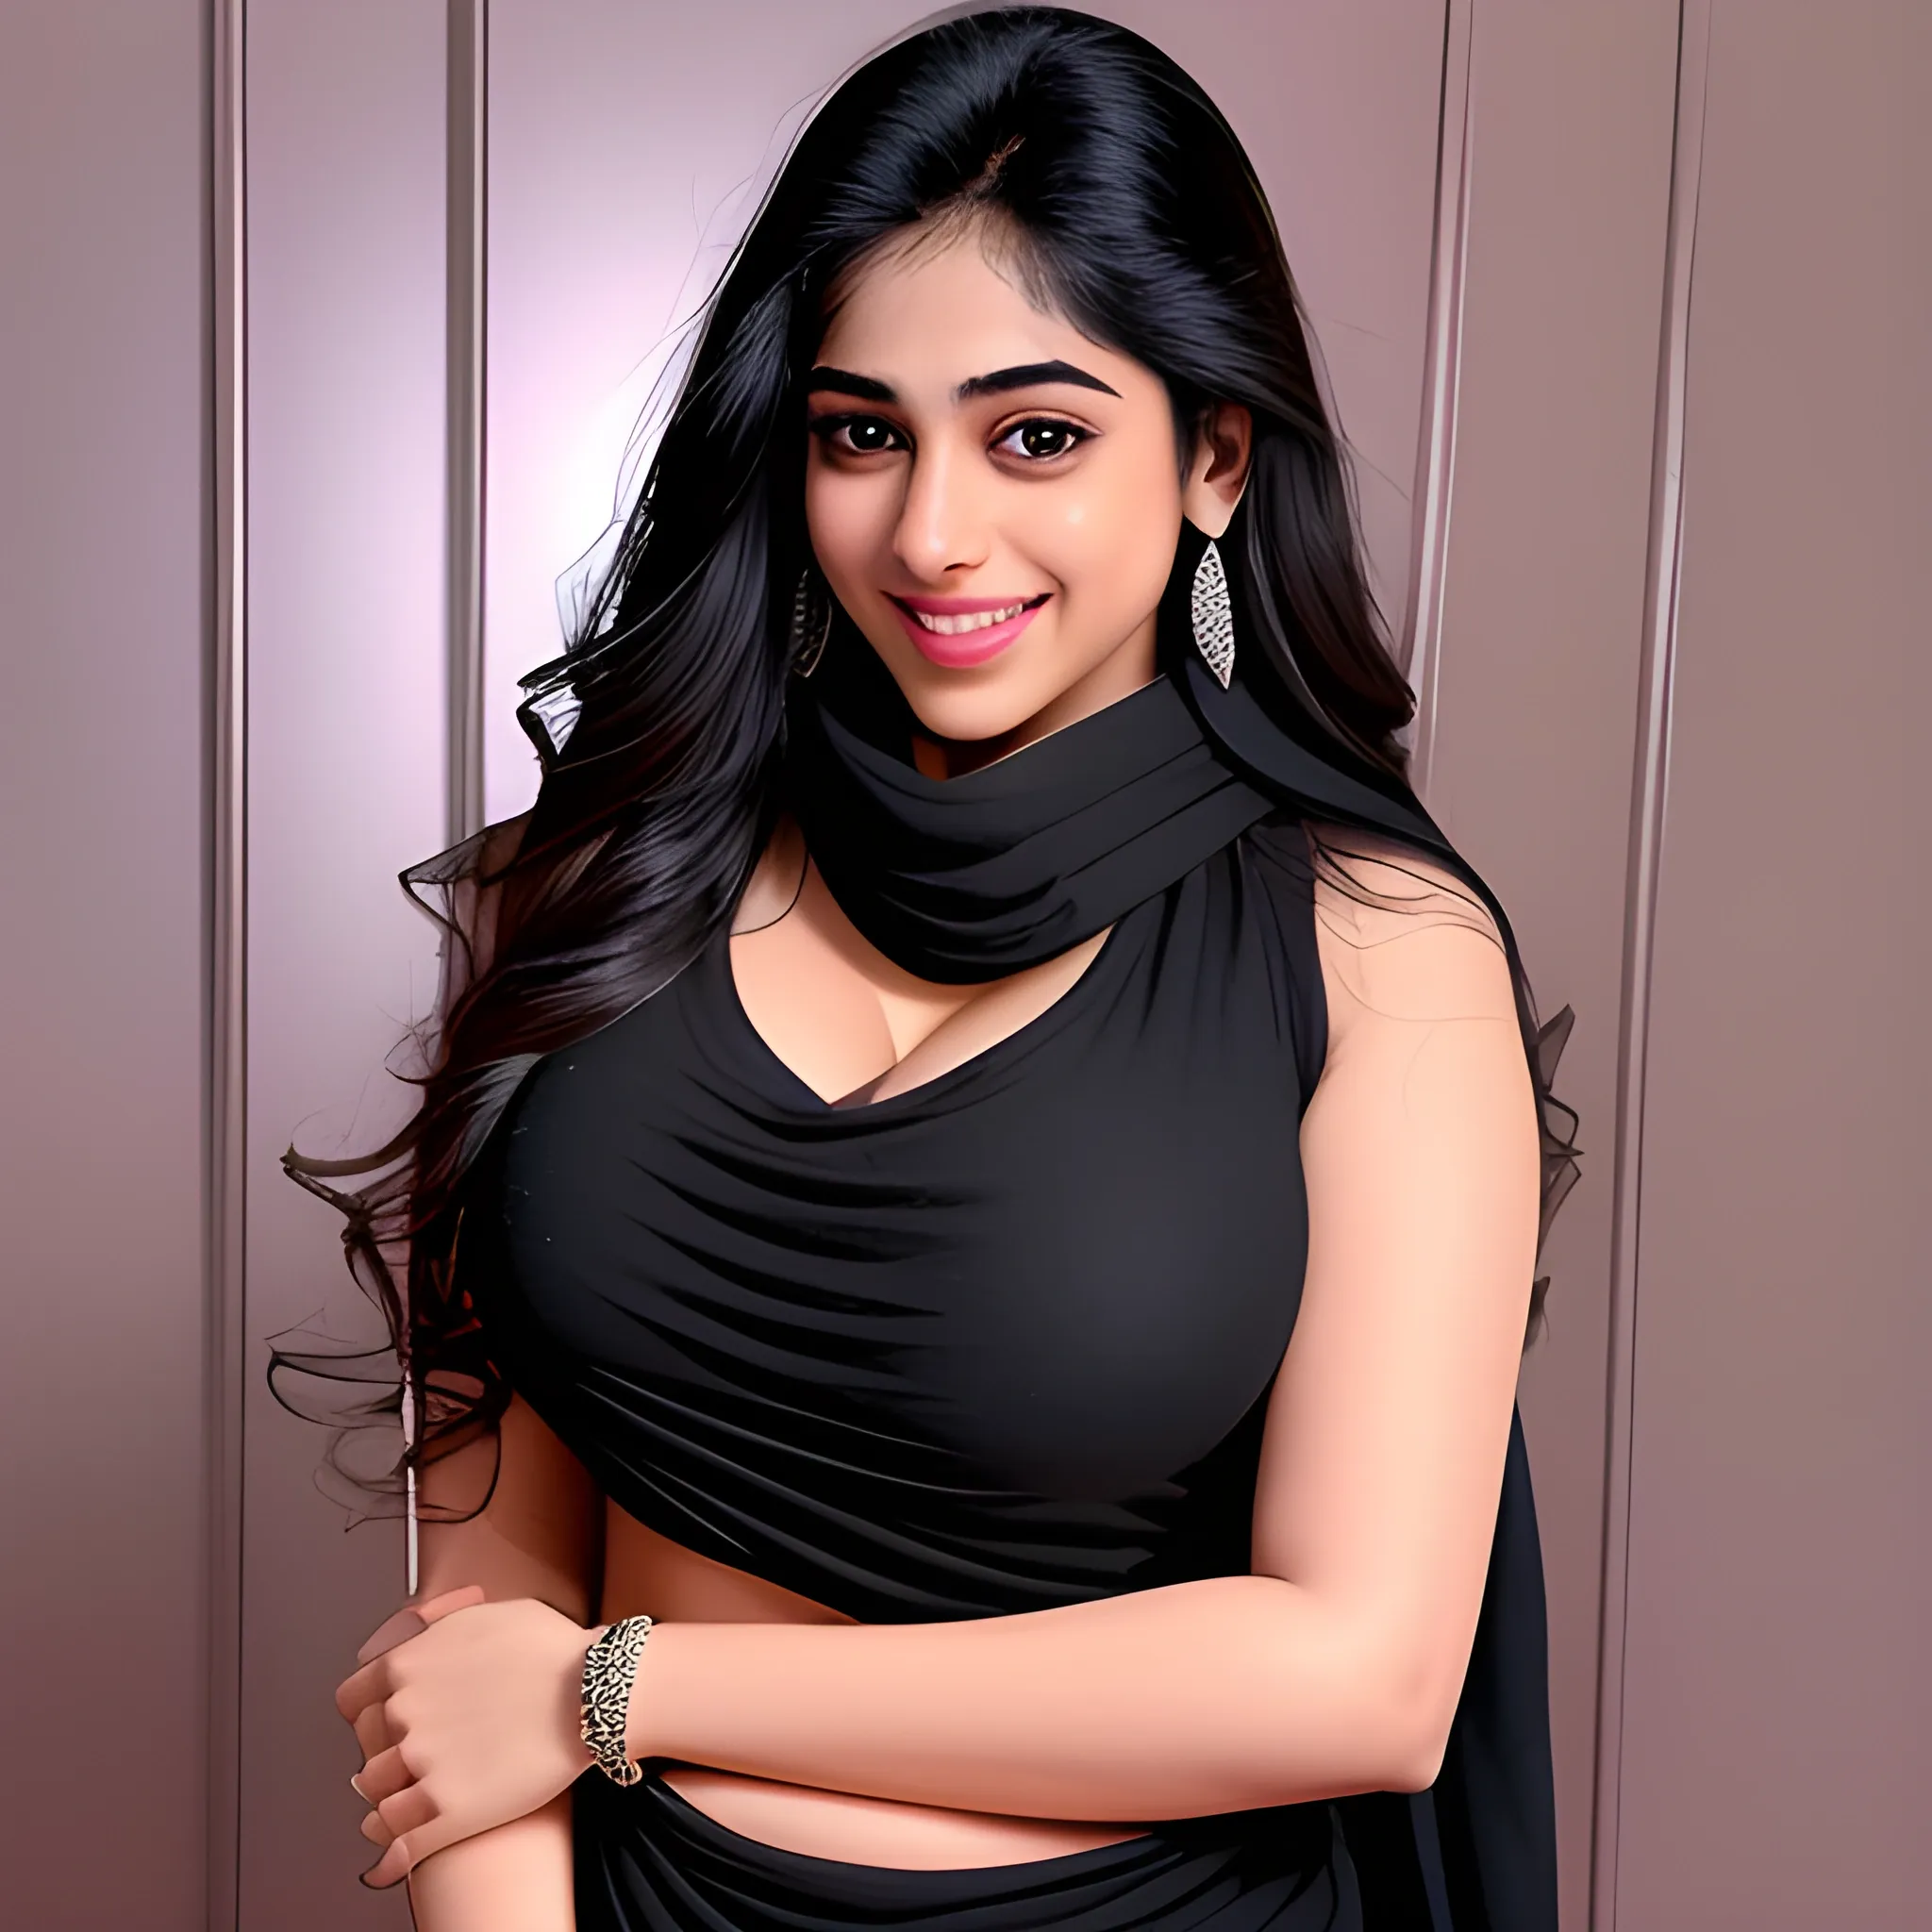 Thick Janvi Kapoor 
bigger thigh
 white muscular body
Enormous breasts 
wearing a black shirt with a scarf over it, body extensions,i can't believe 
beautiful this is
Wearing diamond jewellery flirty open eyes with cutest smile 
At night 
